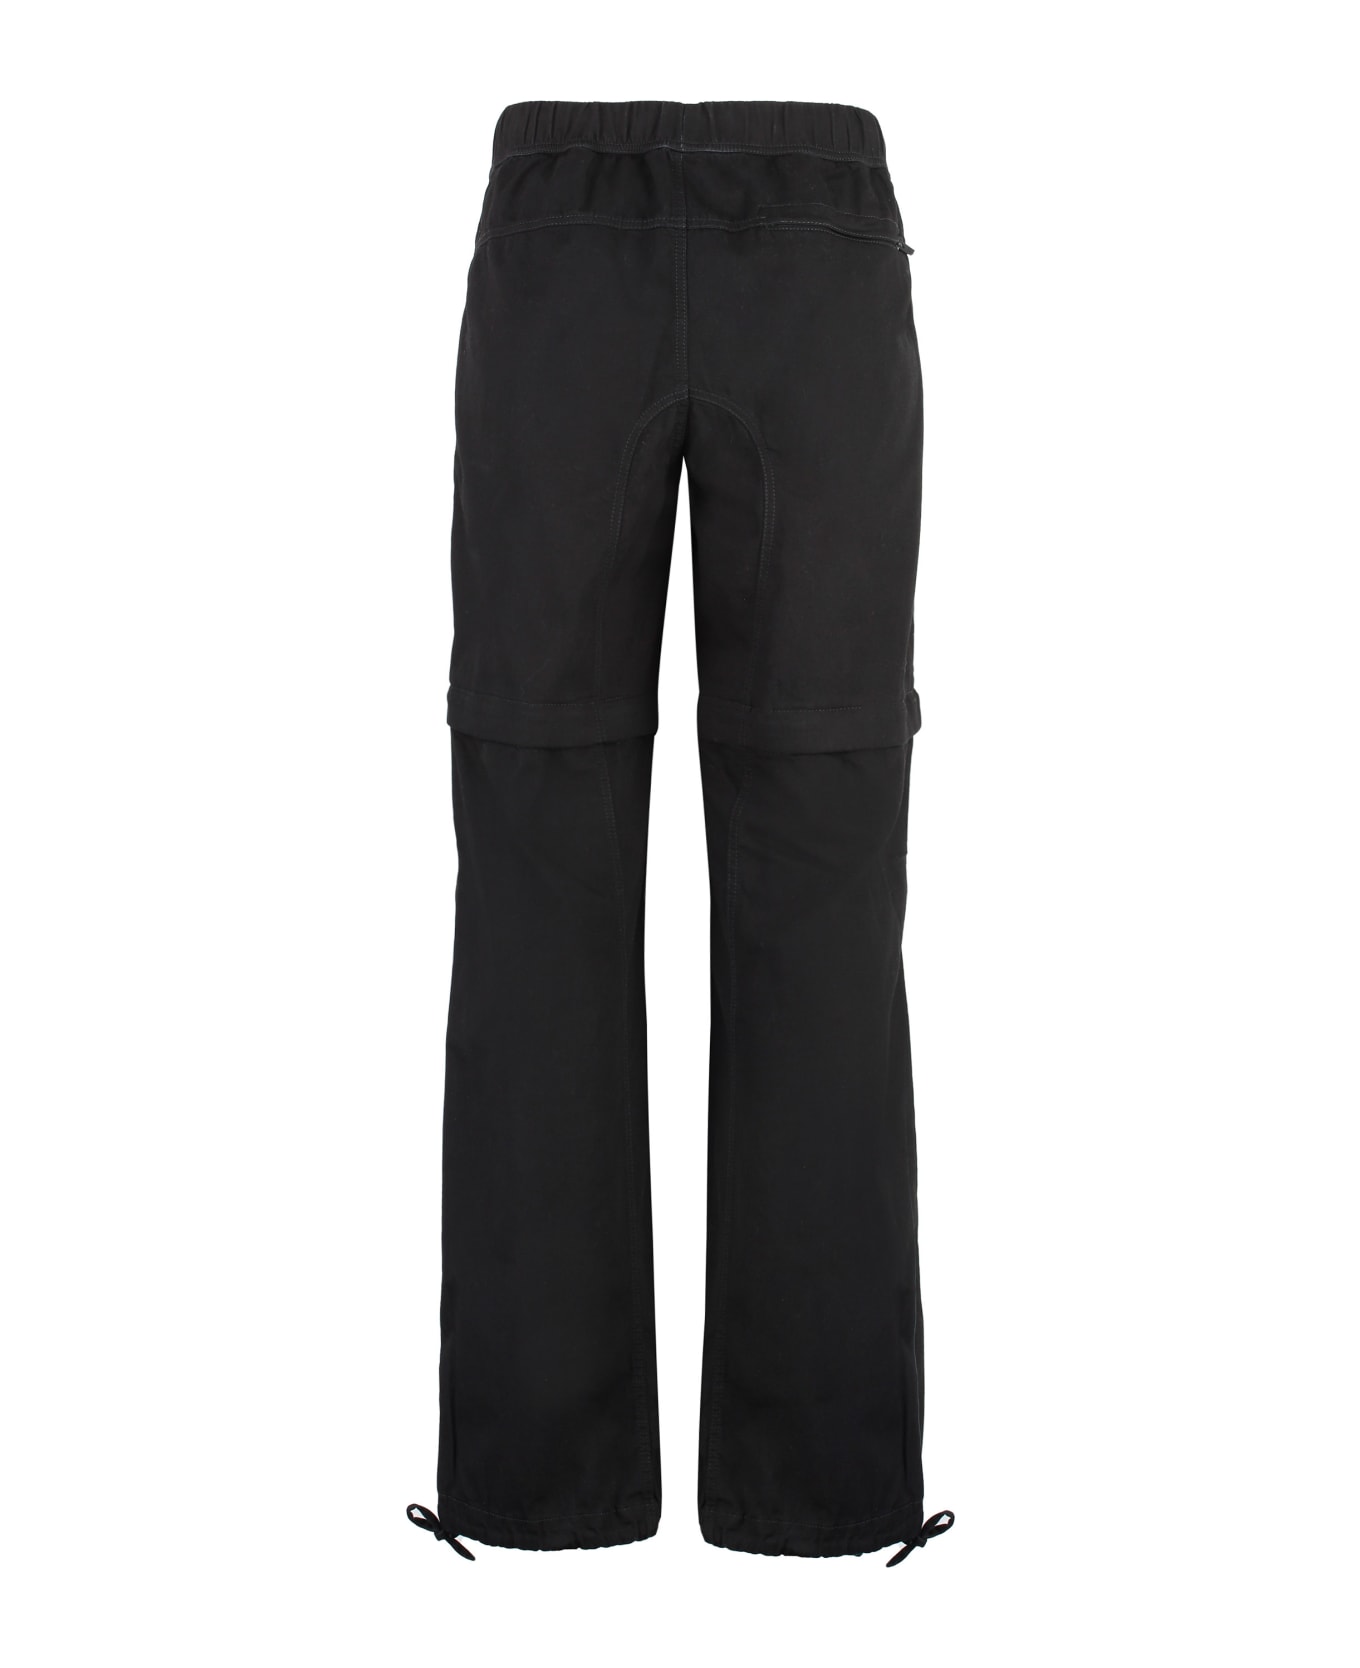 Givenchy Cotton Trousers - black ボトムス